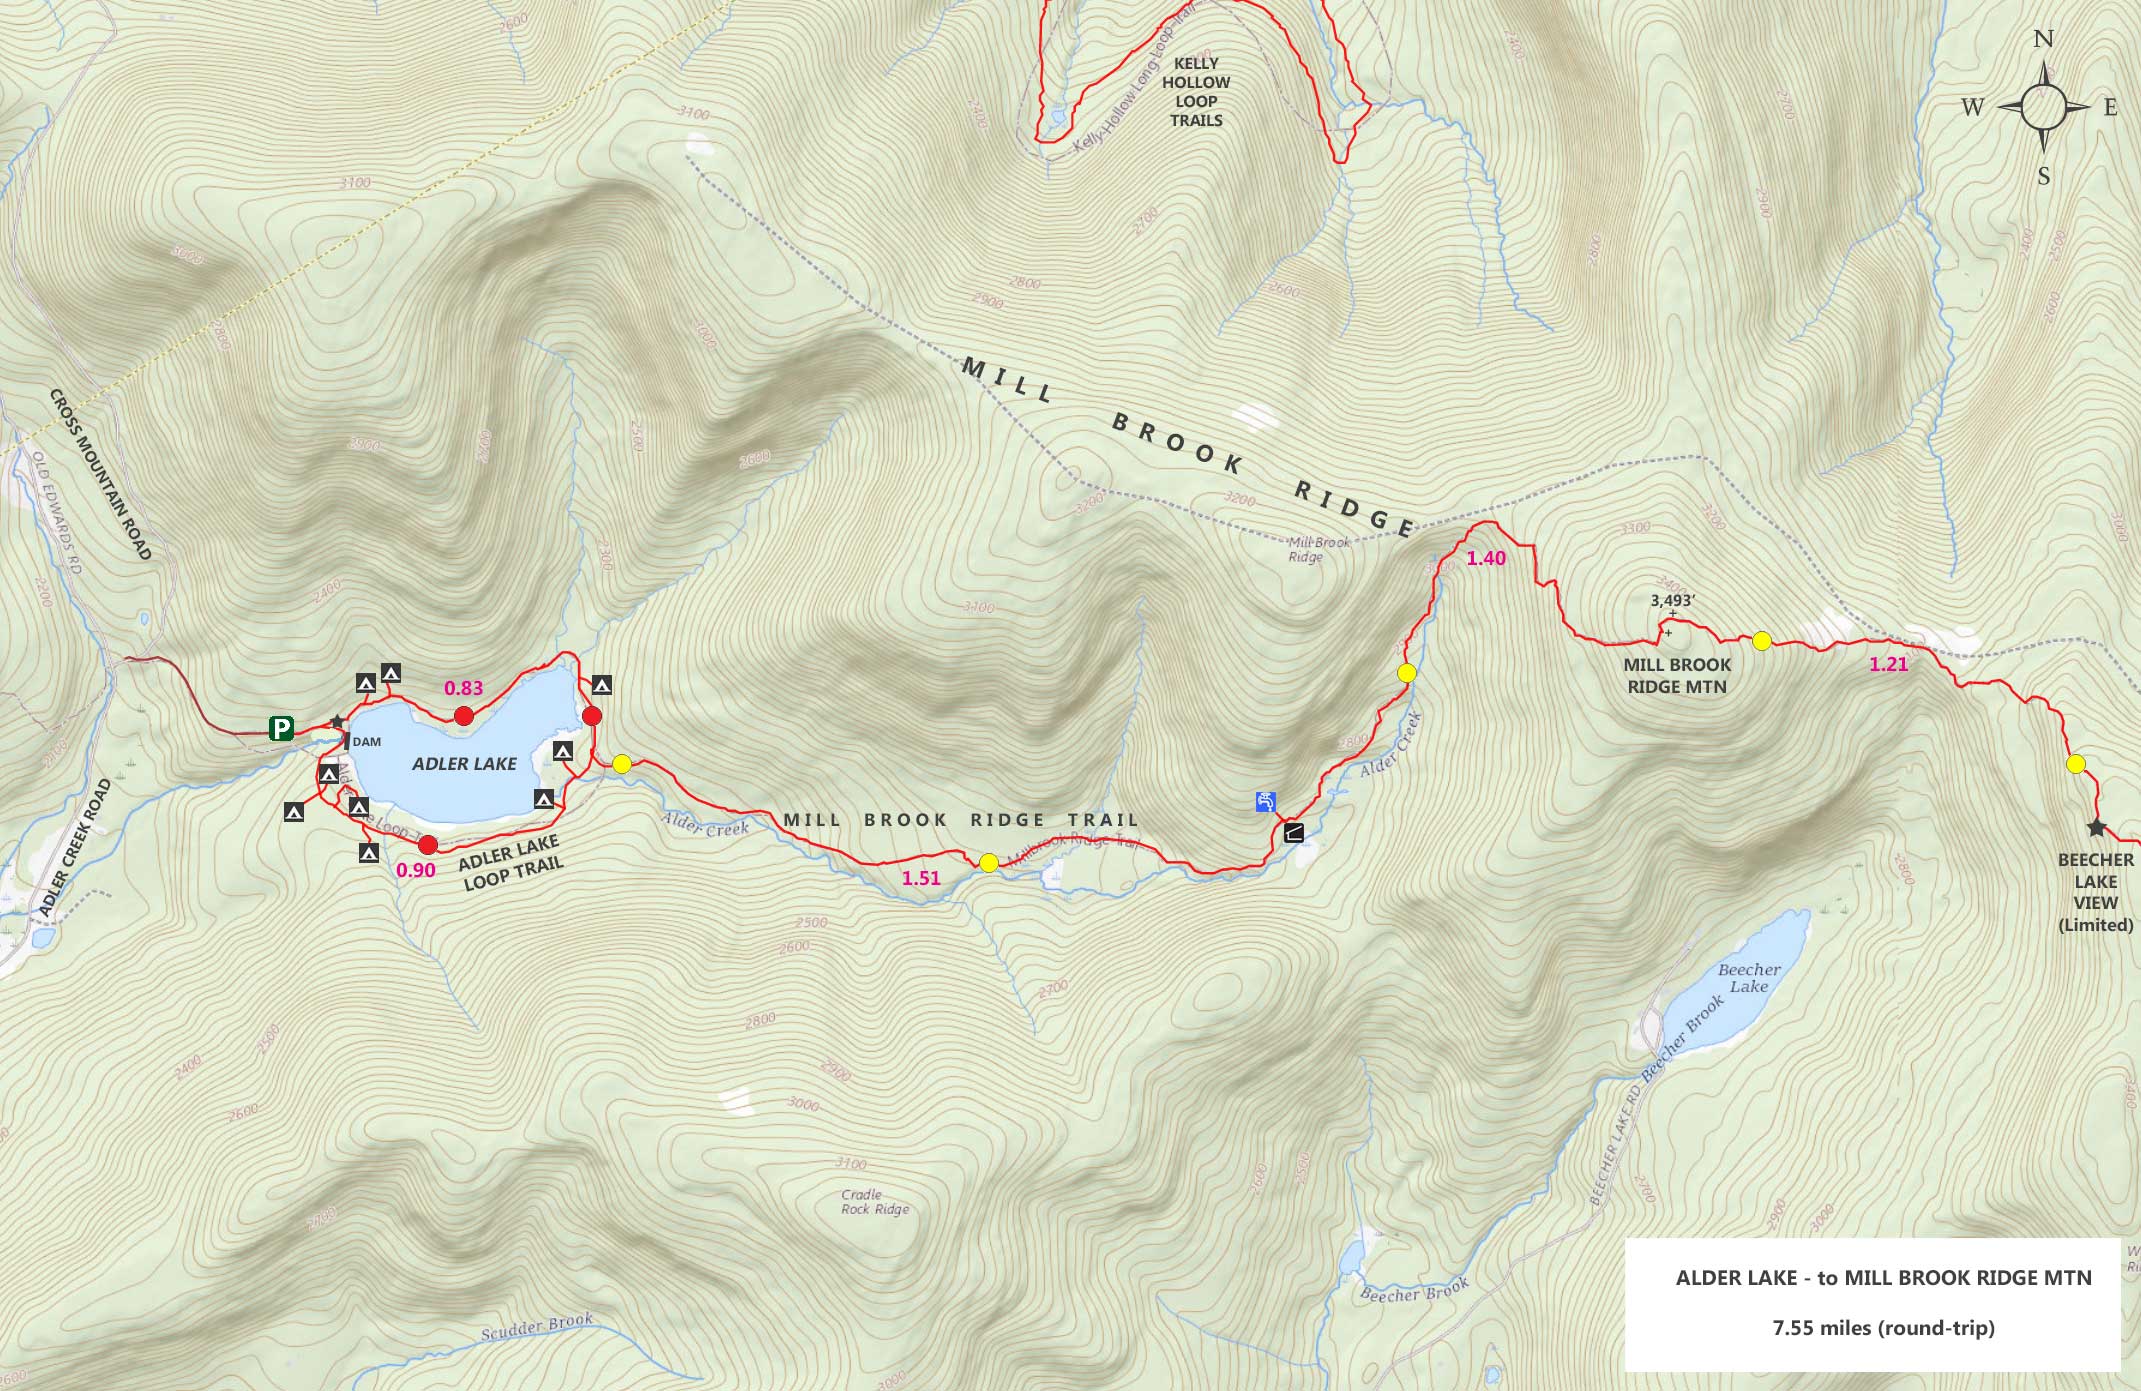 Map of the Alder Lake to Mill Brook Ridge Mountain hike in the Balsam Lake Mountain Wild Forest